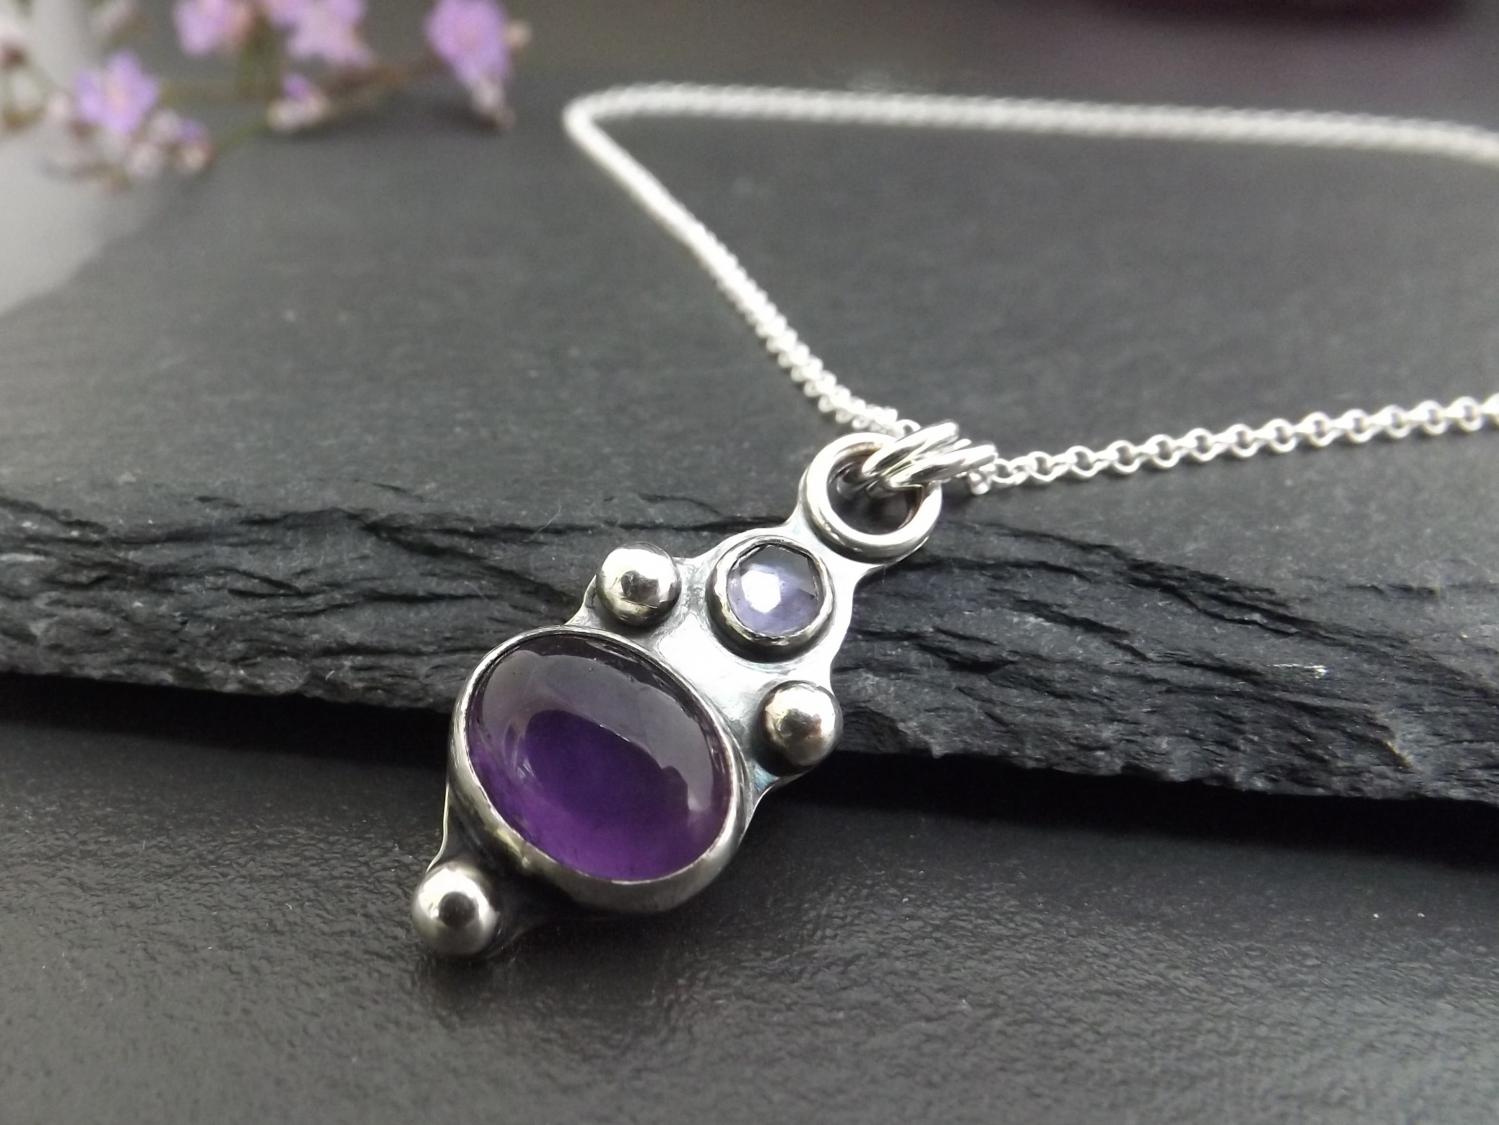 Gothic Amethyst and Iolite Silver Pendant Necklace